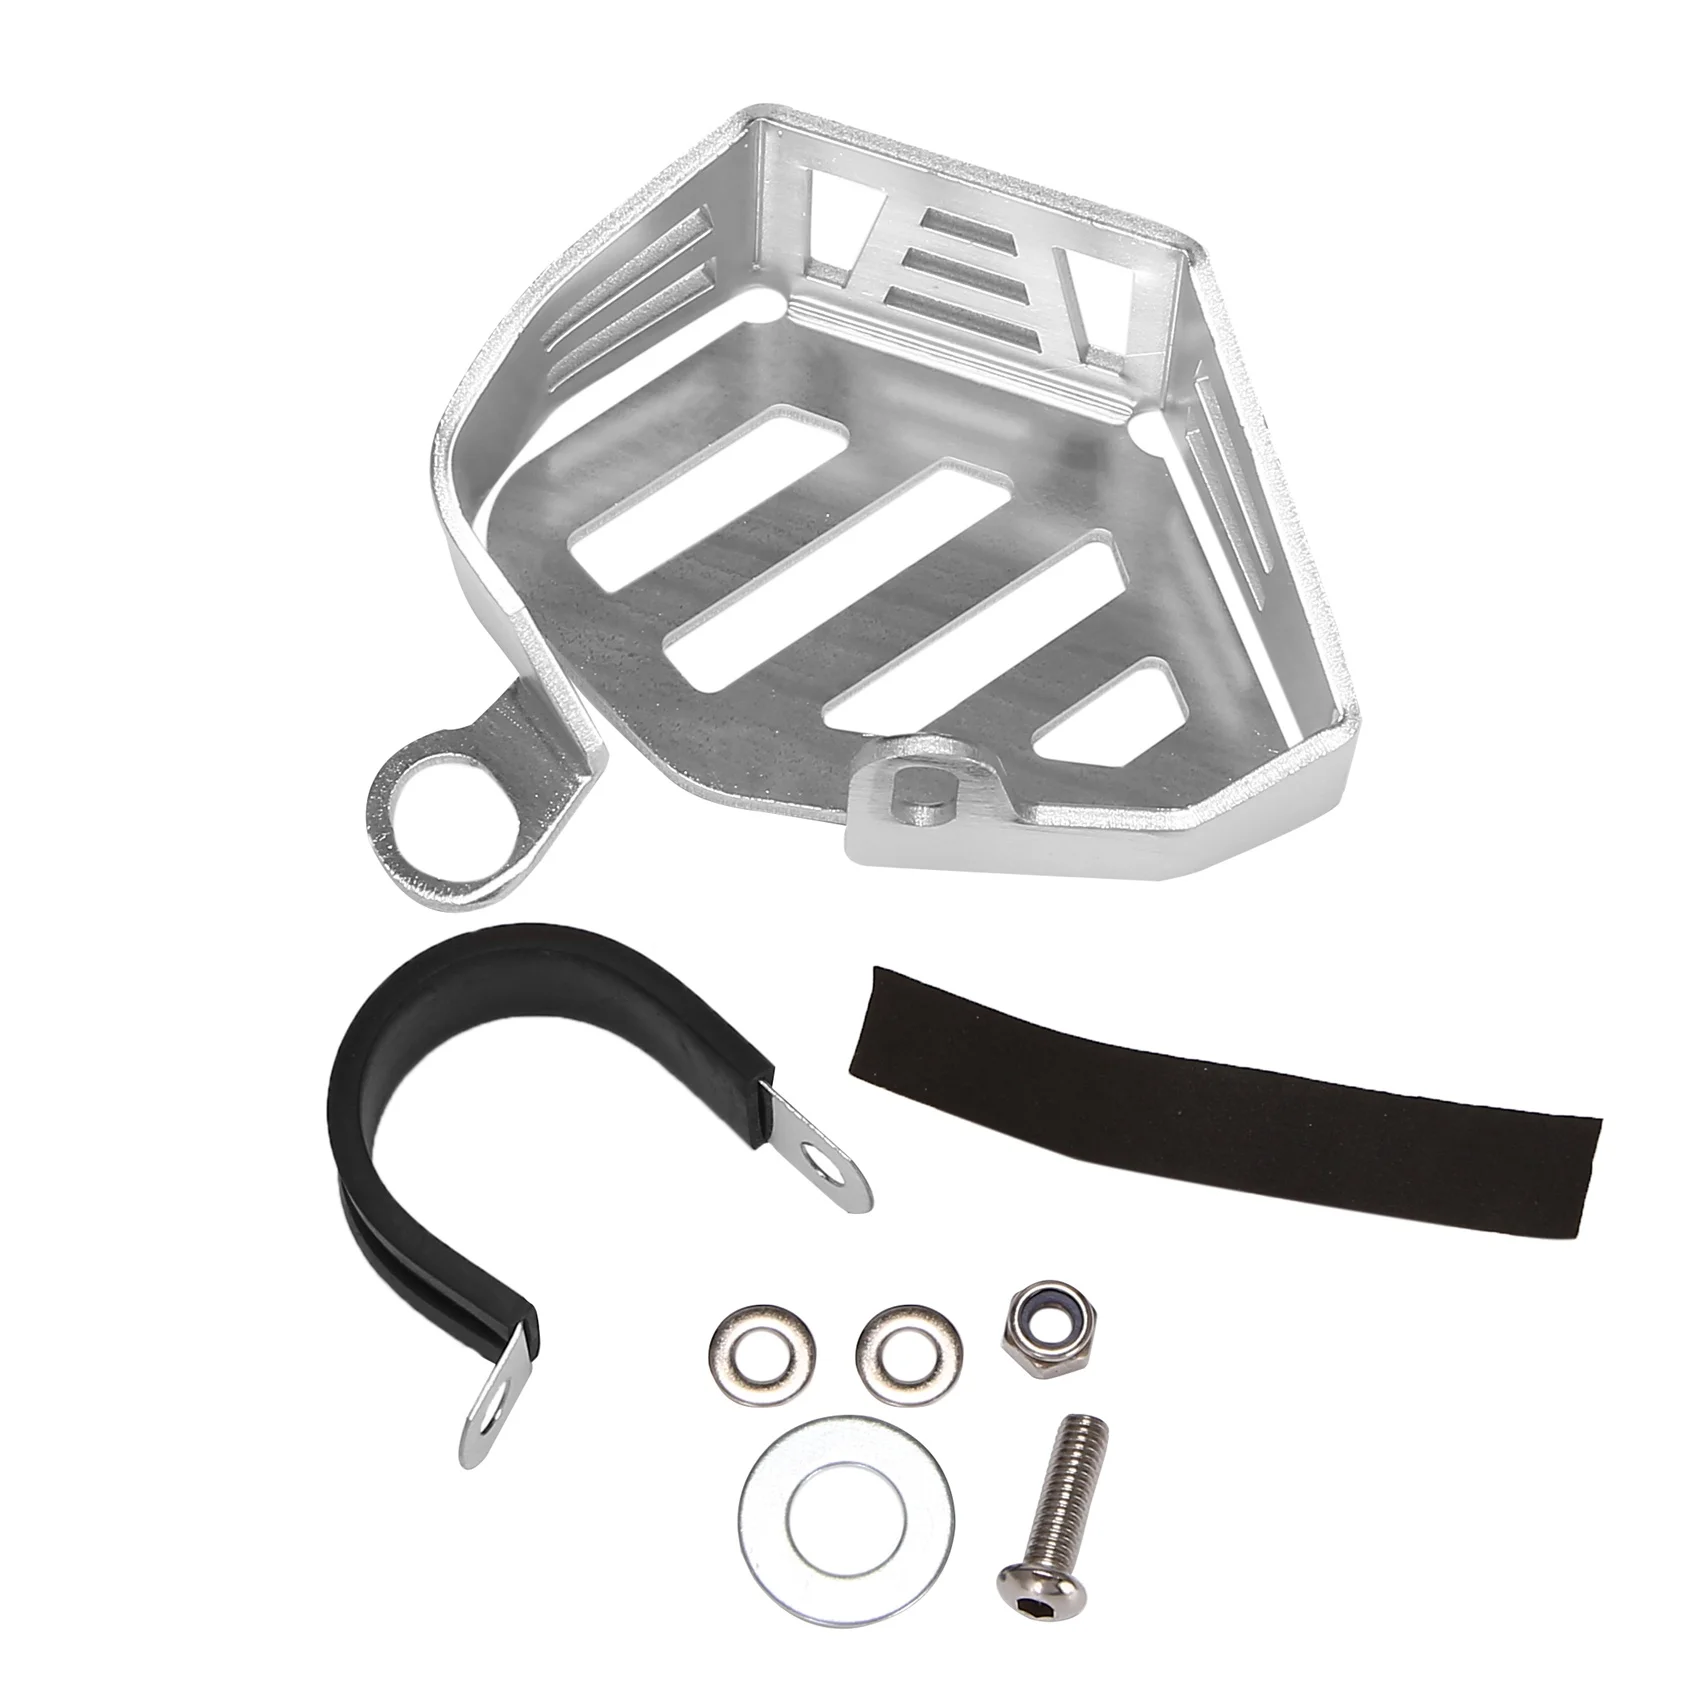 

Silver Front Brake Reservoir Clutch Oil Cup Guard Protector Cover For-BMW R1200GS R1250GS Adv R Nine